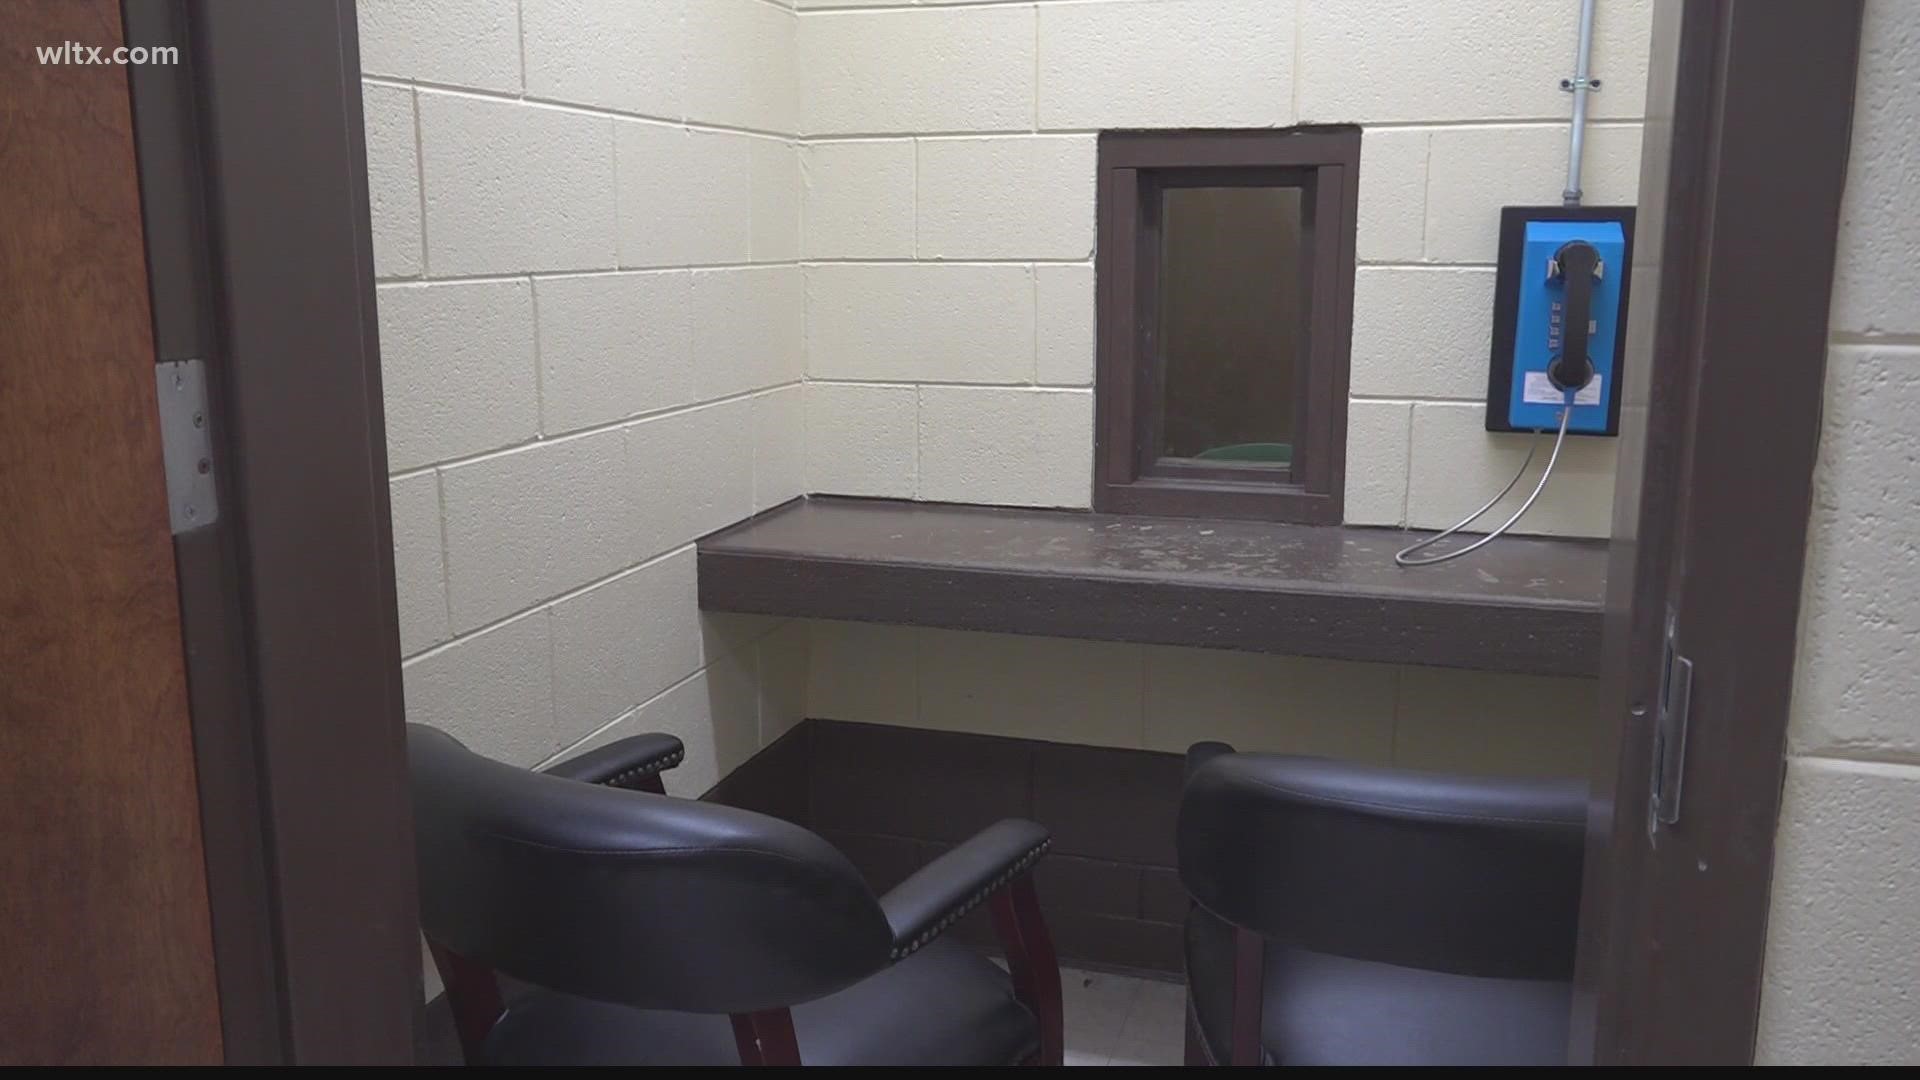 Visitation hours return to Sumter jail following phone upgrades 